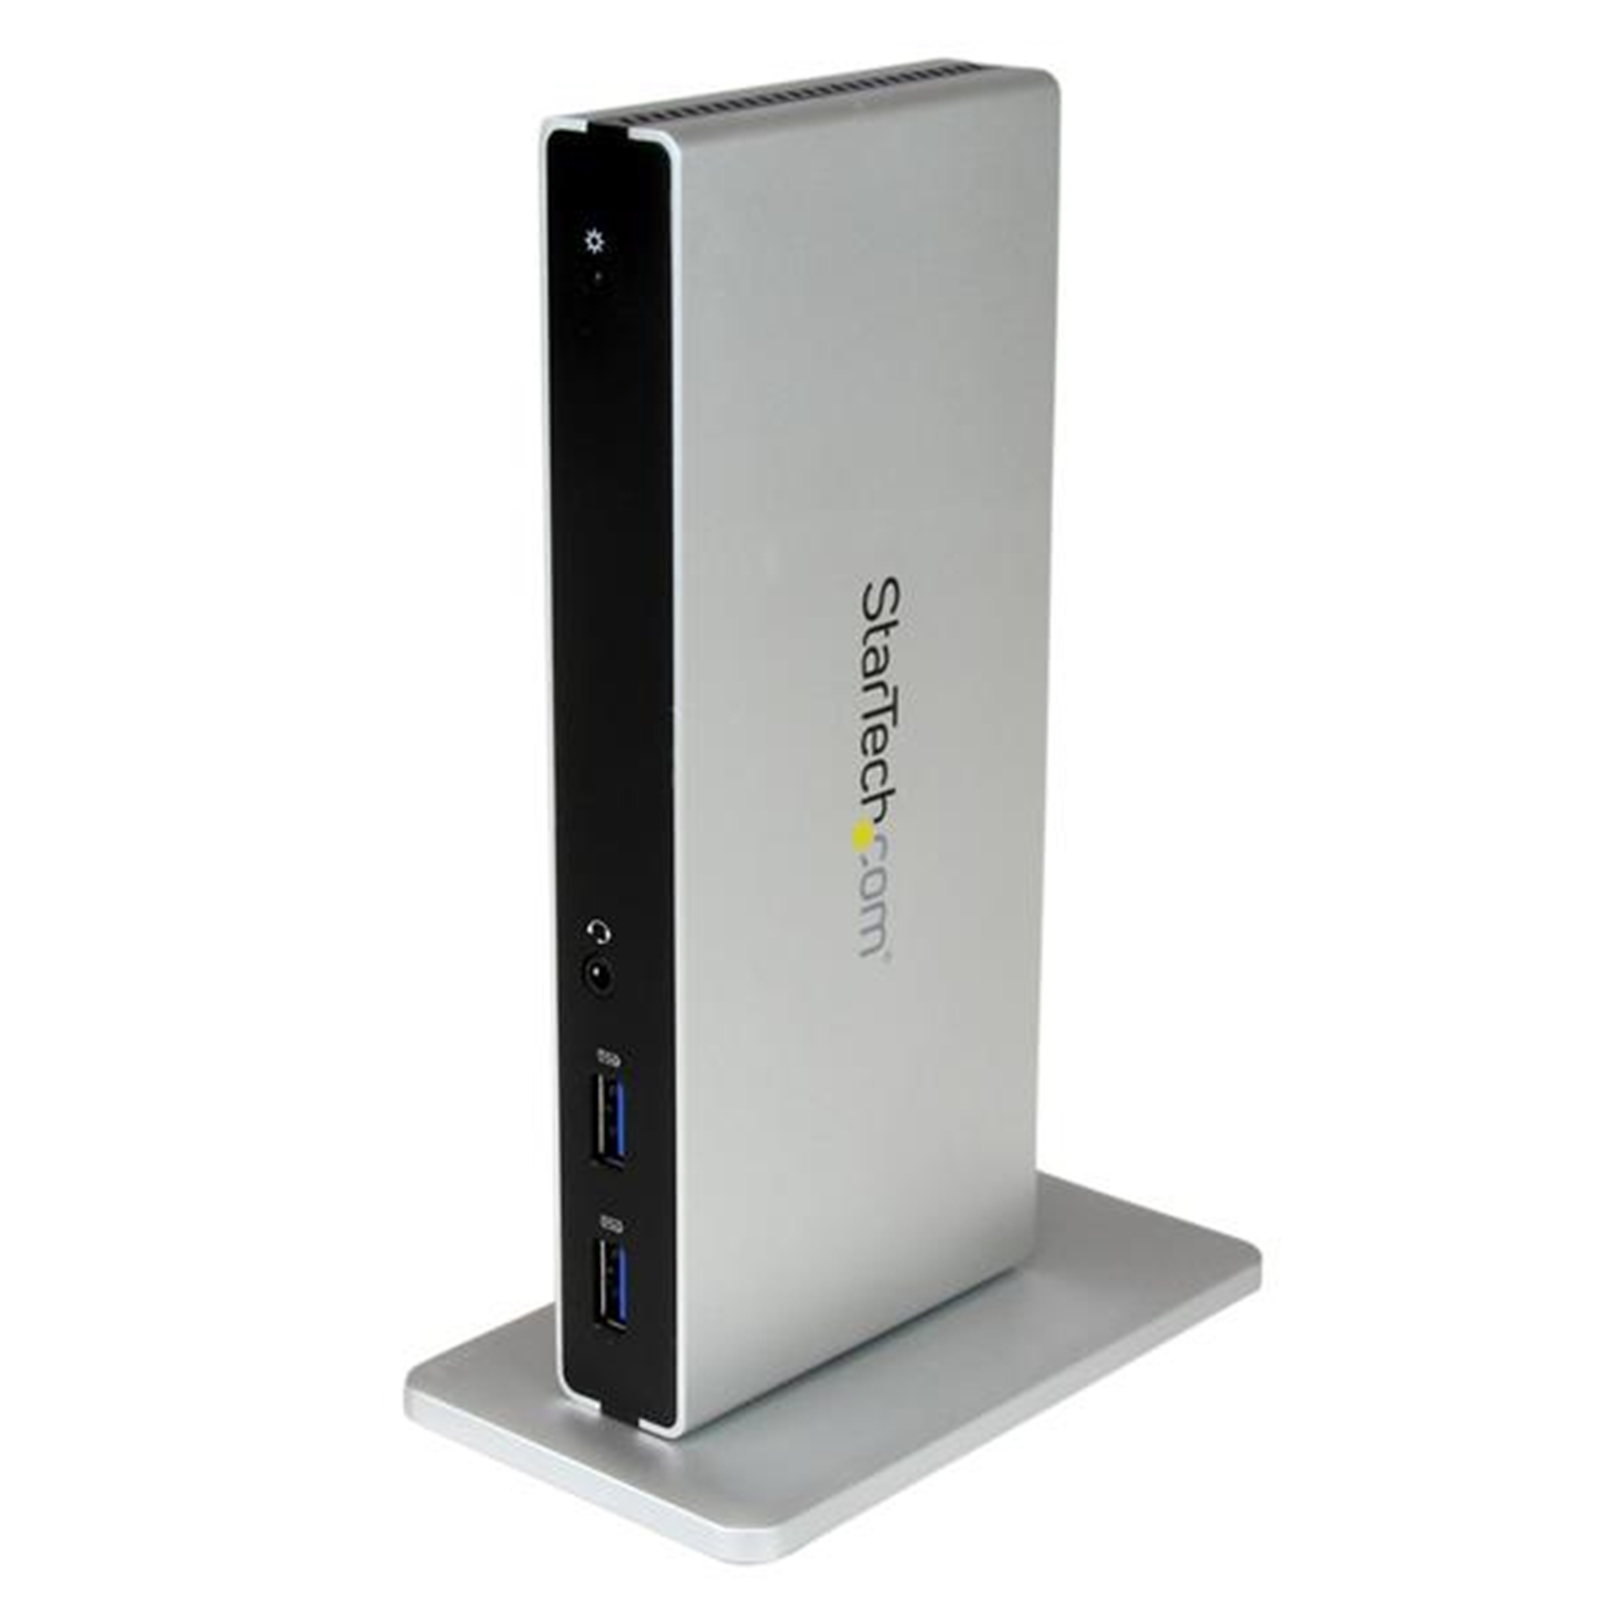 what is a genesys logic usb2.0 card reader